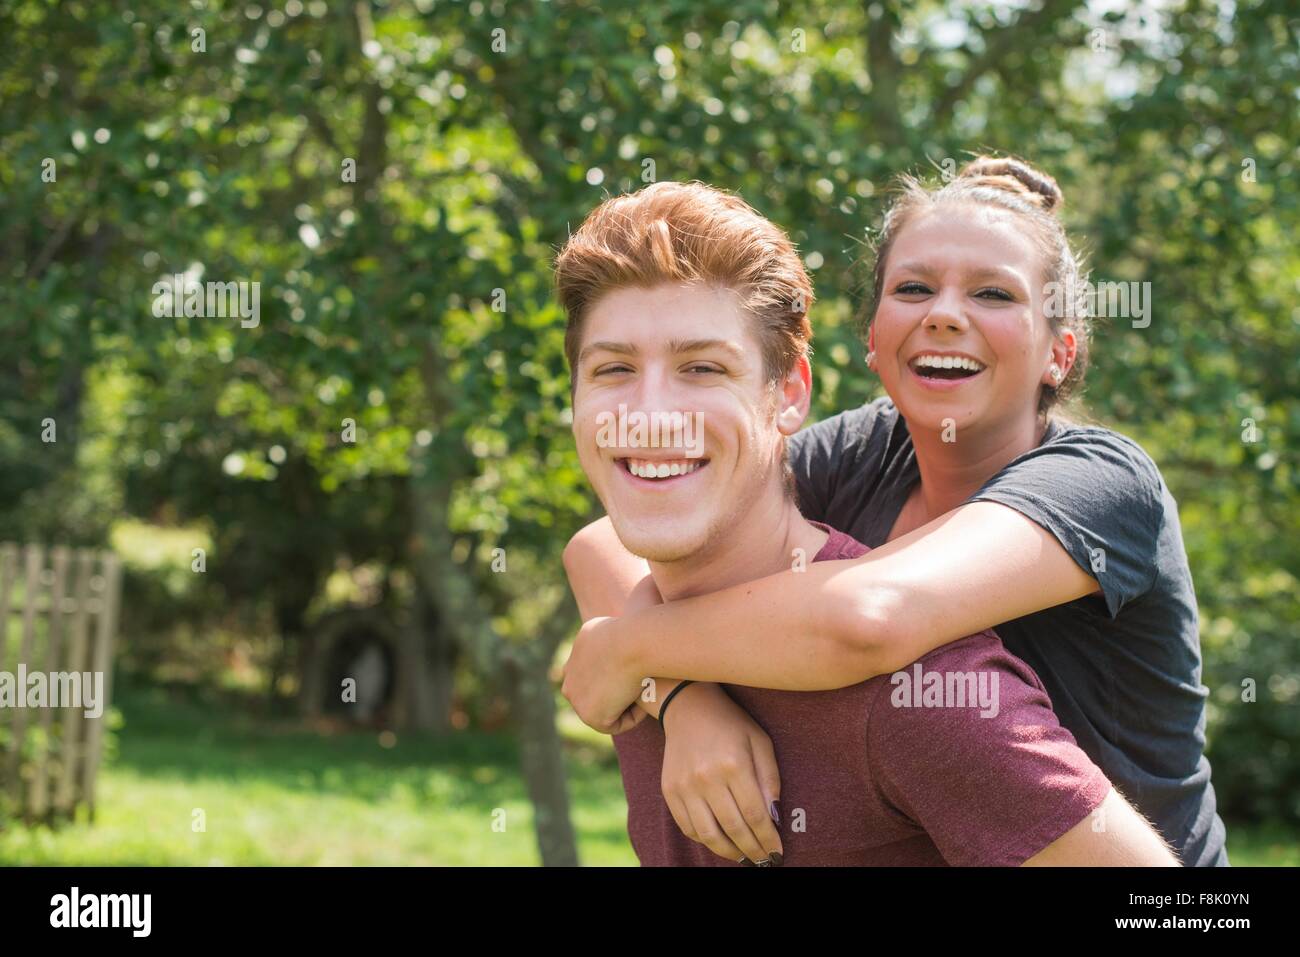 Portrait of young man giving young woman piggy back looking at camera smiling Stock Photo